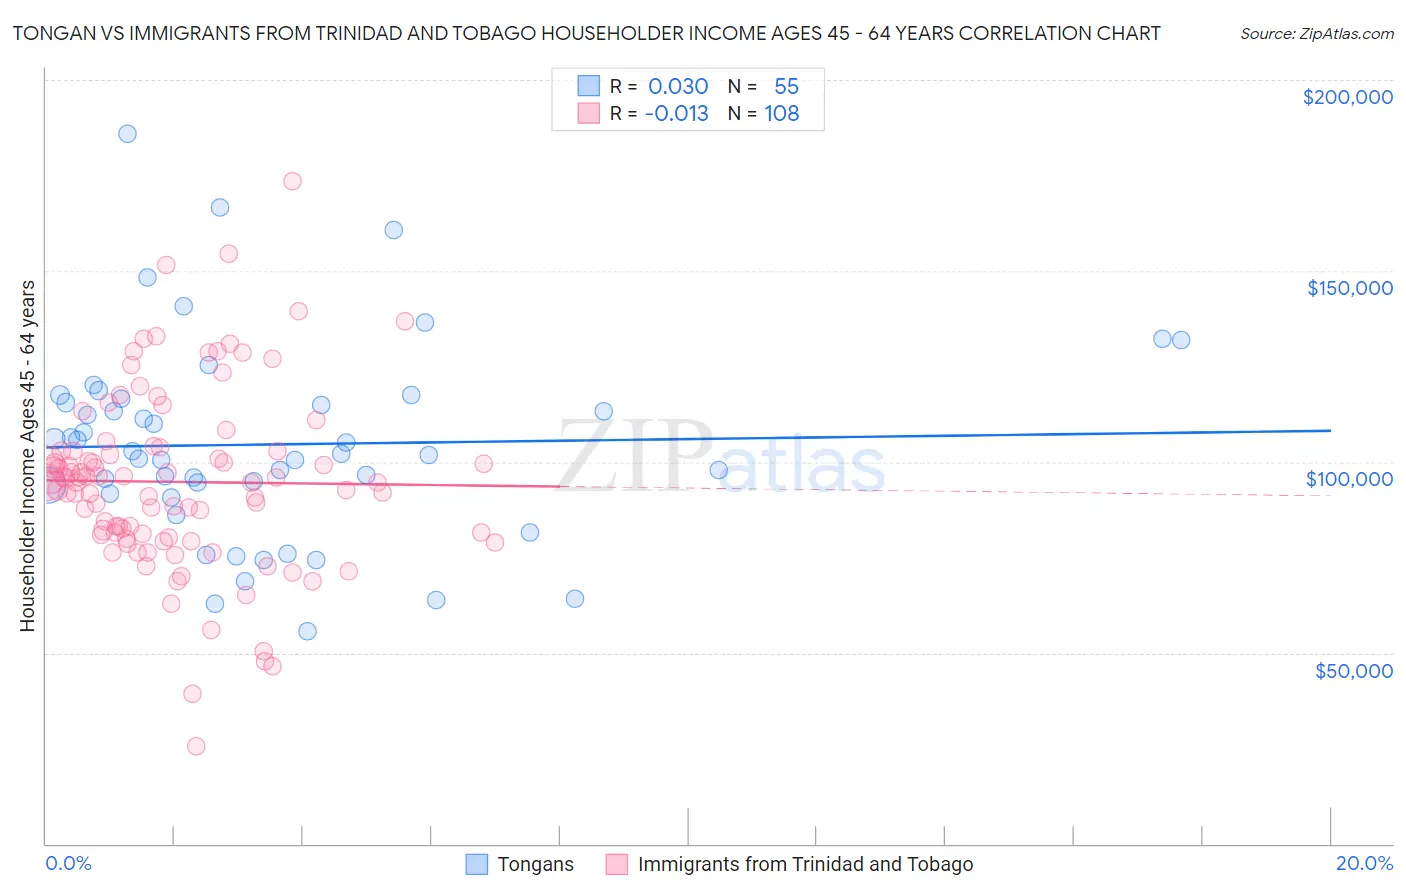 Tongan vs Immigrants from Trinidad and Tobago Householder Income Ages 45 - 64 years